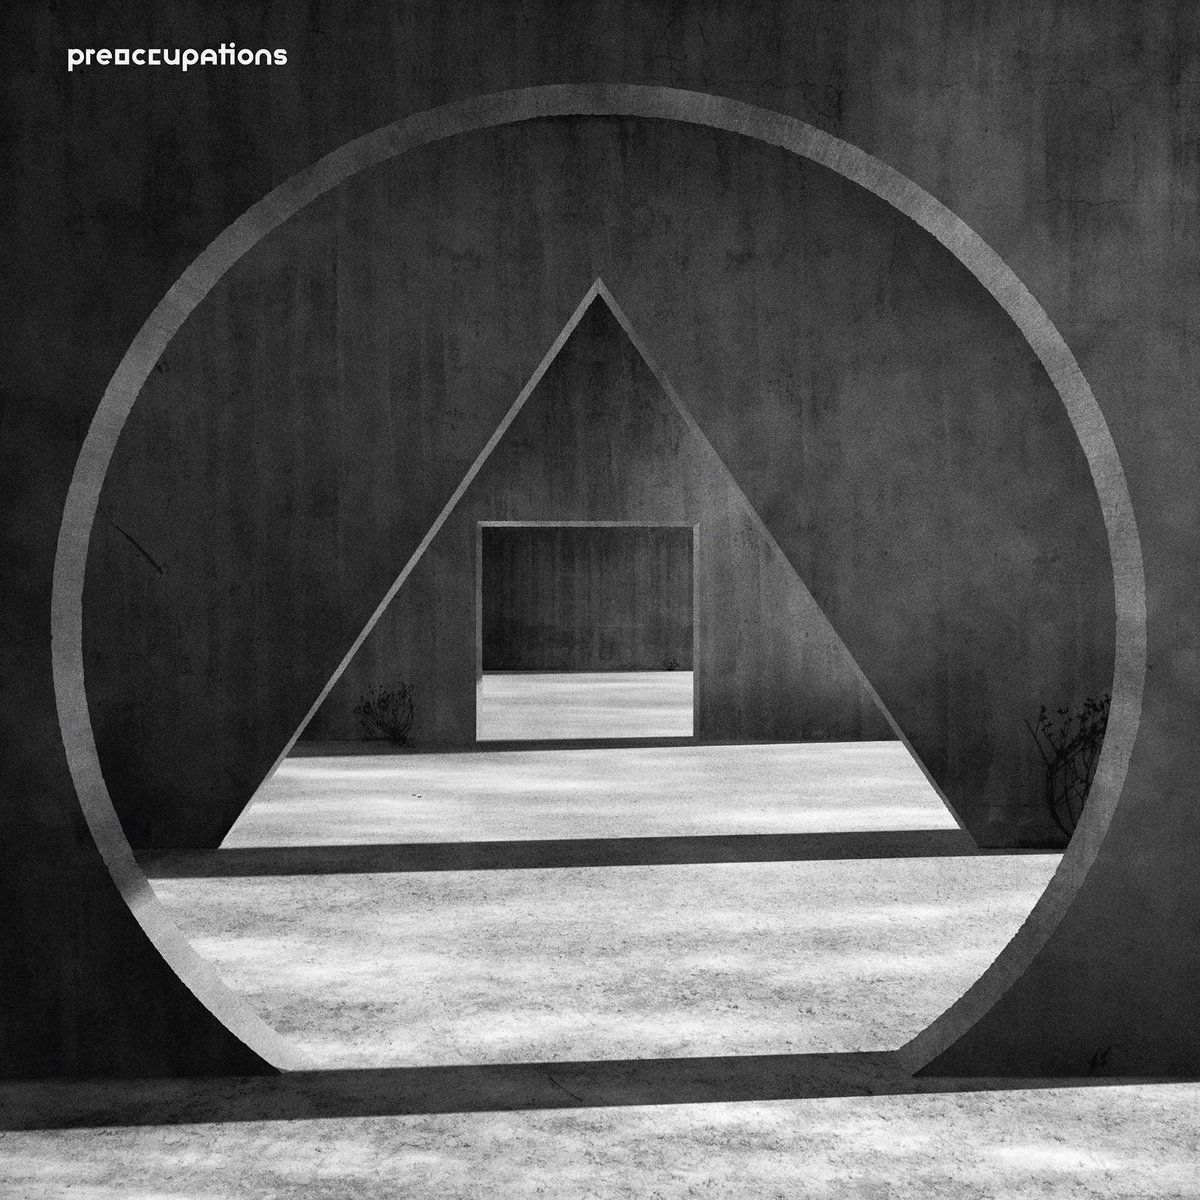 Preoccupations - New Material (2018)